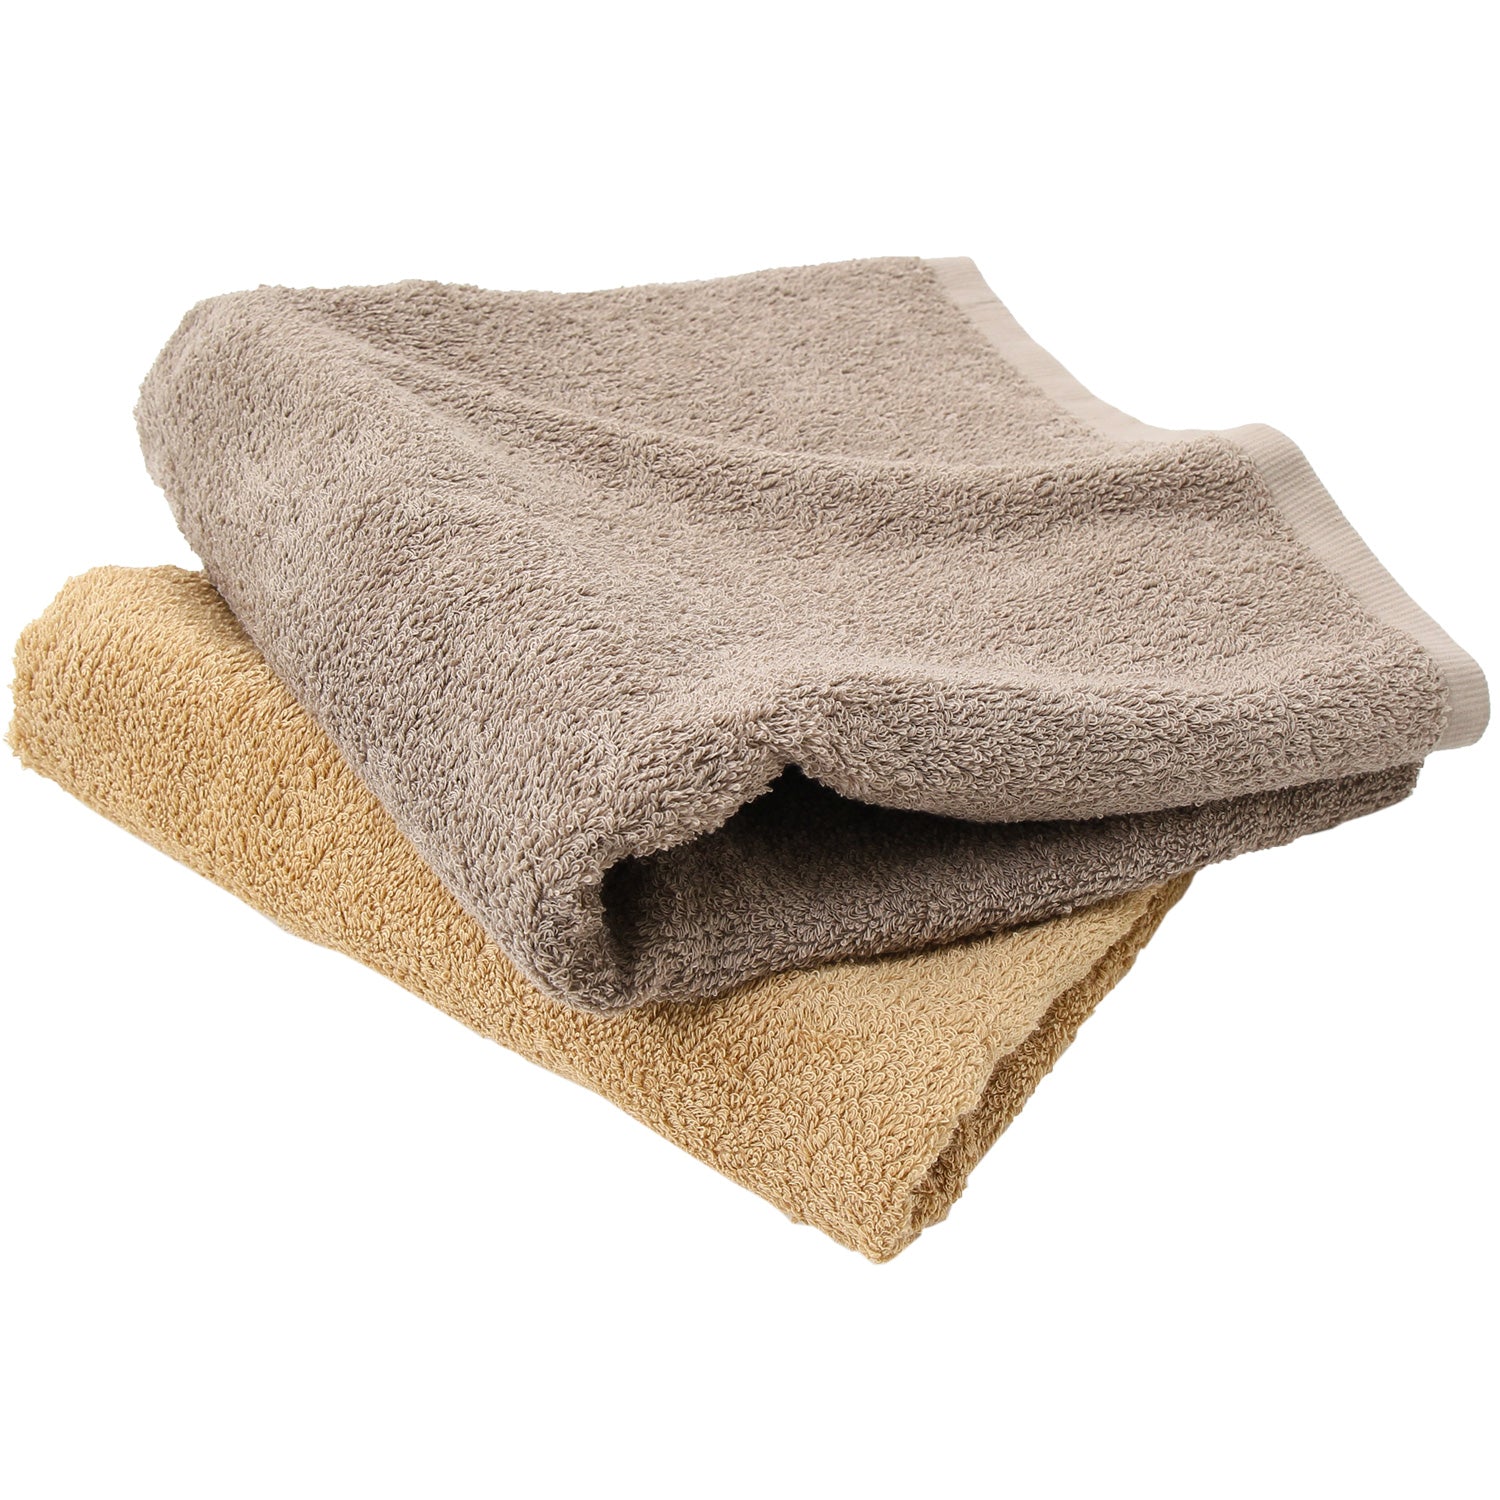 LuxClub Bath Towel, Soft, Absorbent, Lint-Free, and Colorfast, Ideal f